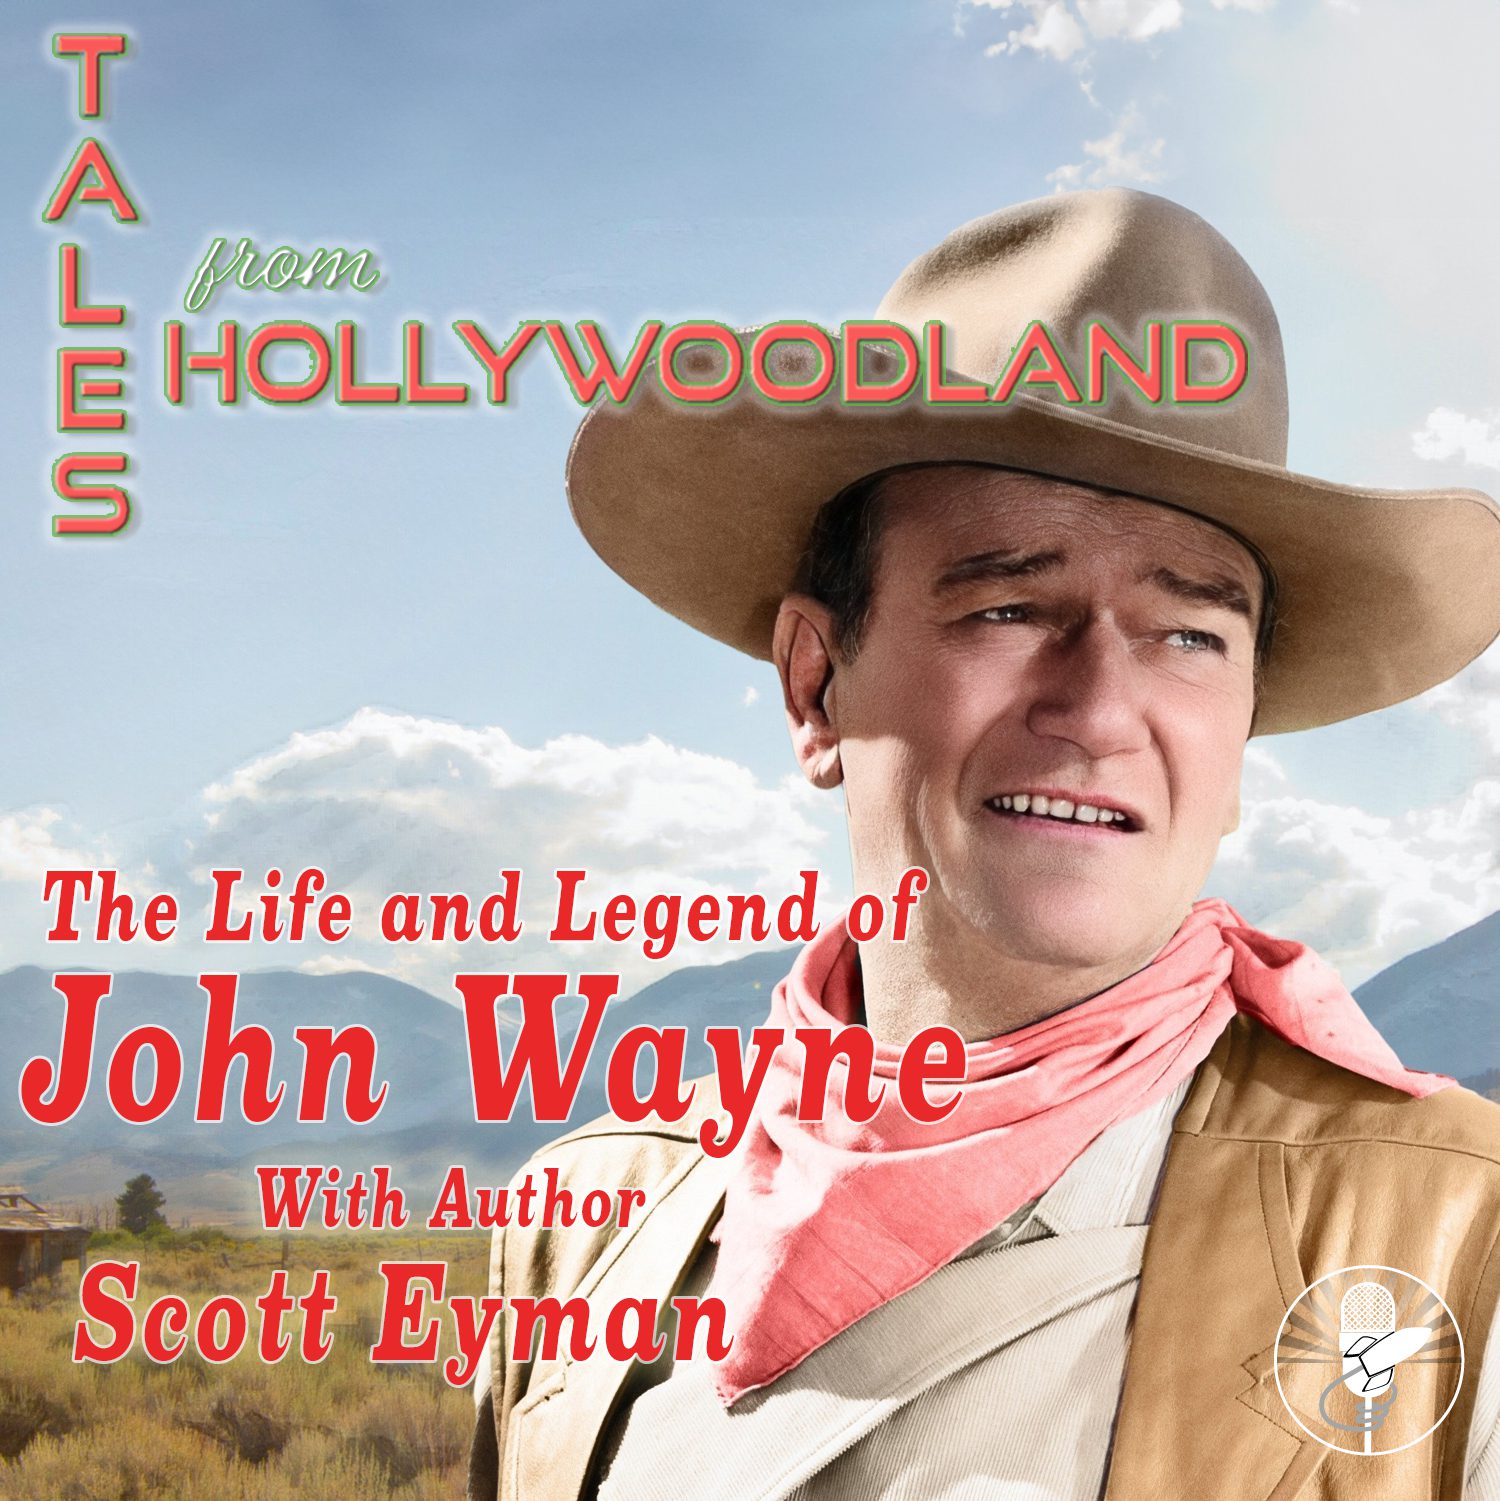 Tales From Hollywoodland Ep 33 - The Life and Legend of John Wayne